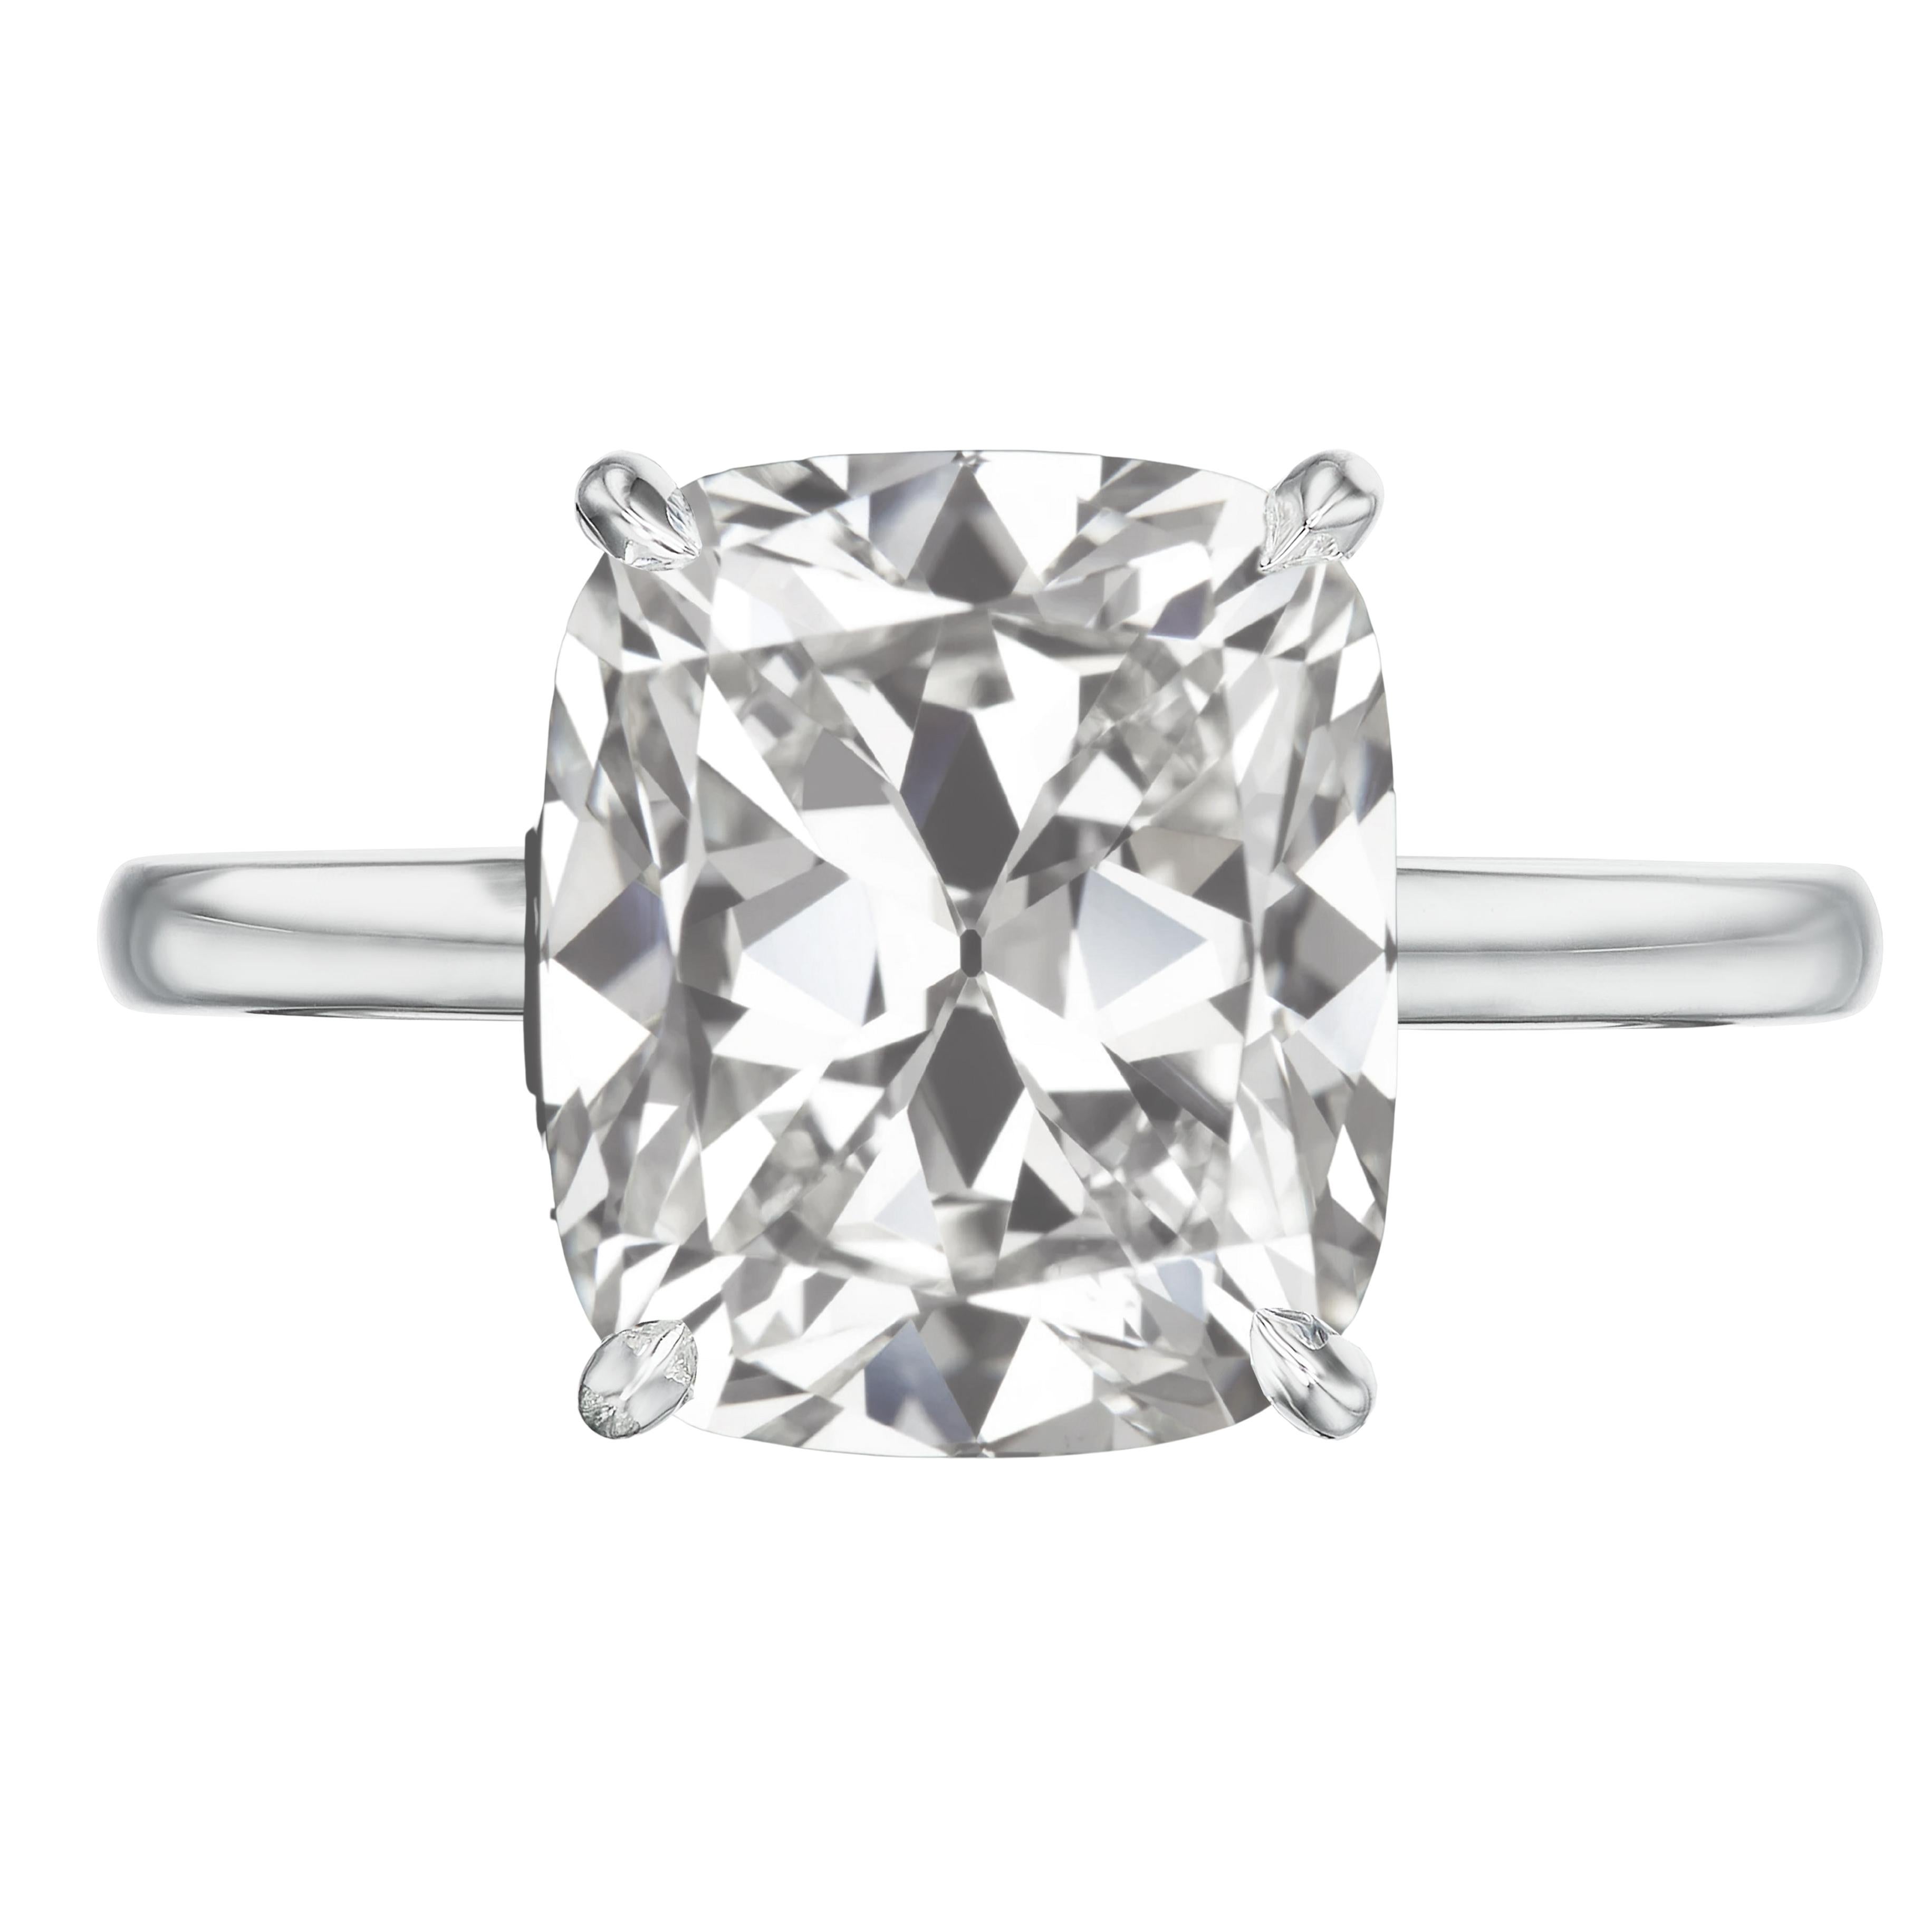 An exquisite GIA certified 4 carat old mine cushion cut diamond ring
F Color
VS2 Clarity

